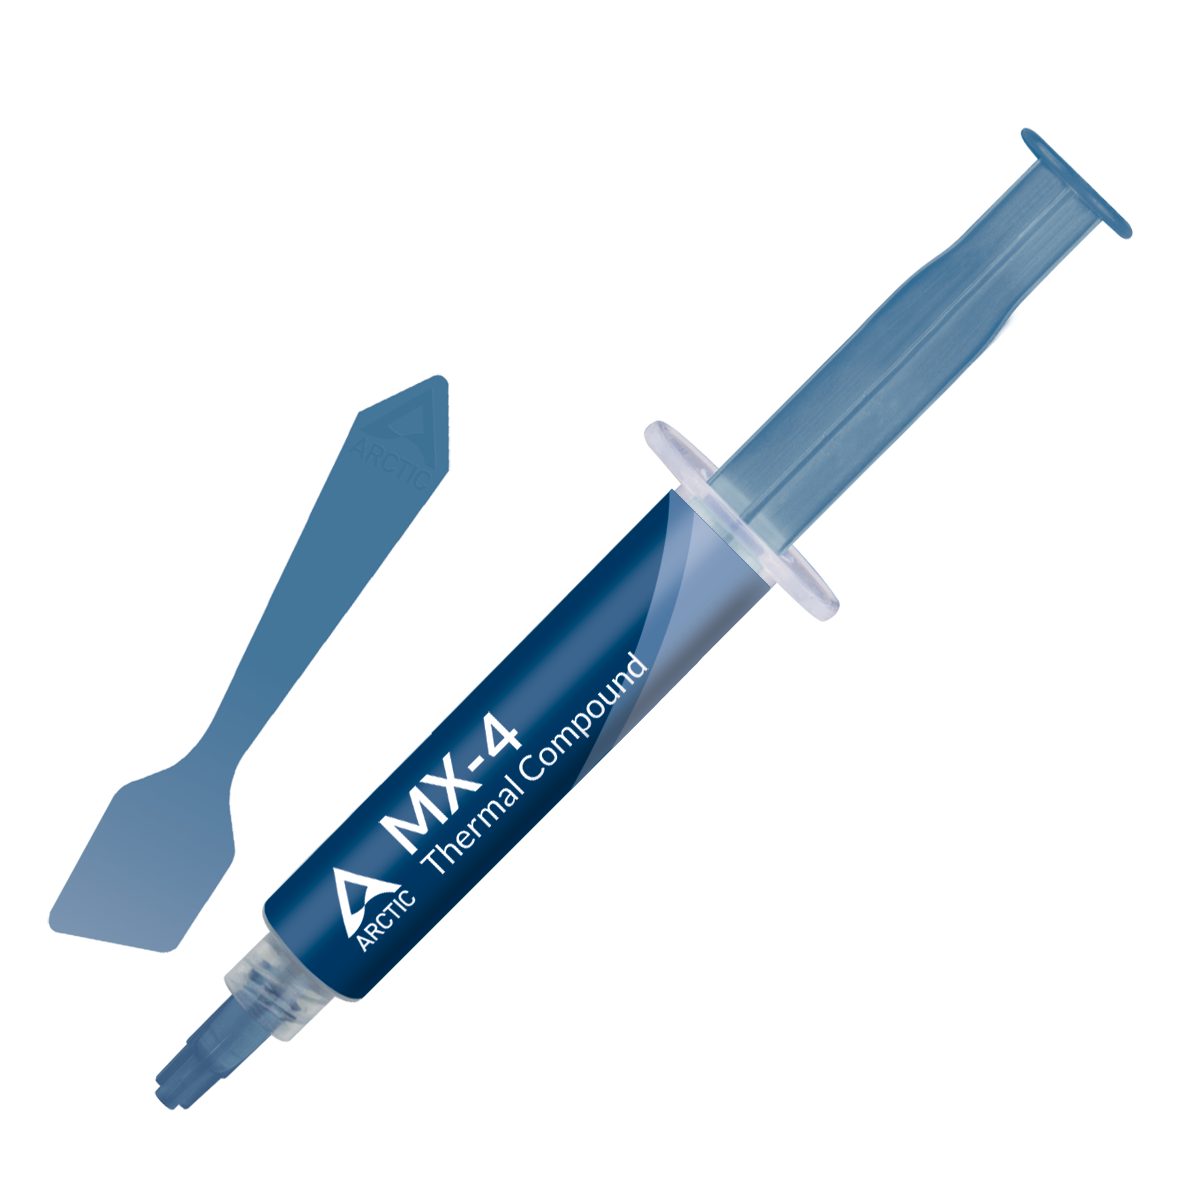 ARCTIC MX-4 8g - High Performance Thermal Compound with Spatula - Arctic 2.35.64.01.025